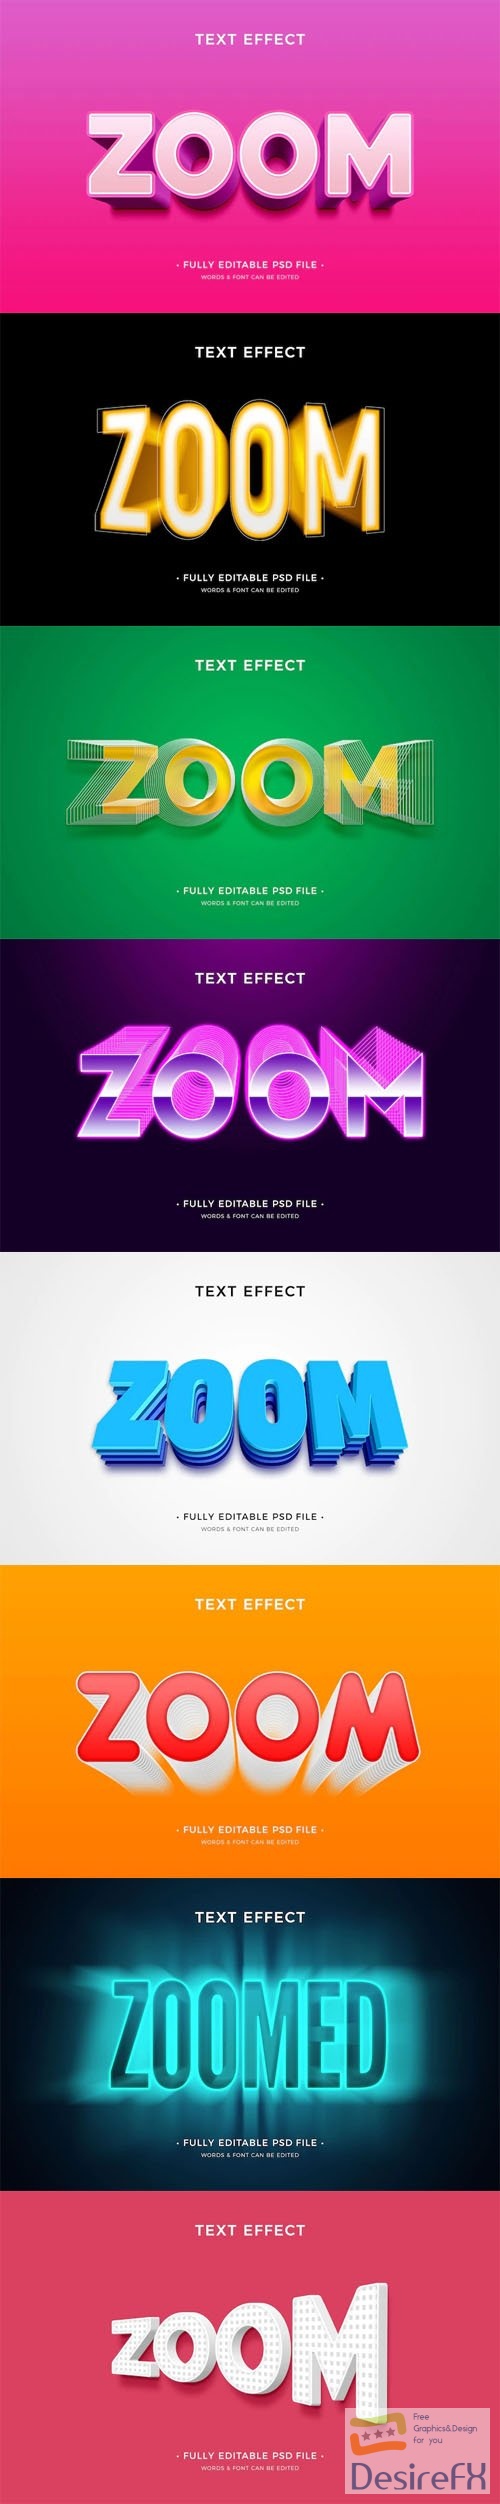 8 Zoom Text Effects Templates for Photoshop